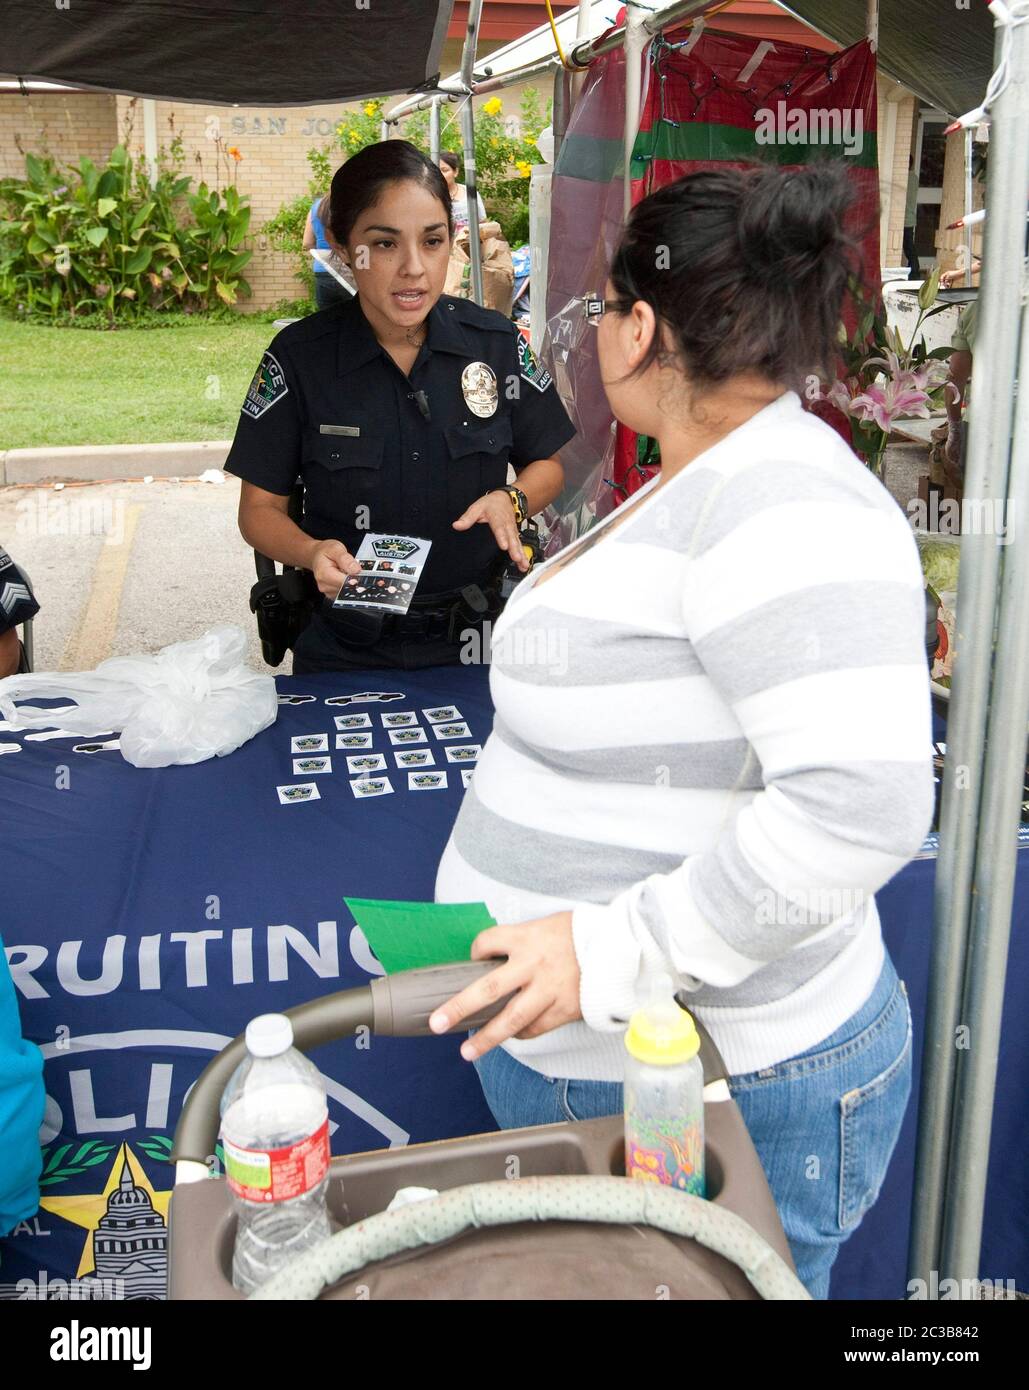 Austin, Texas USA, October 6, 2012: Female Hispanic police officer talks to visitors at a recruiting booth for the Austin Police Department during a church festival. ©MKC / Daemmrich Photos Stock Photo